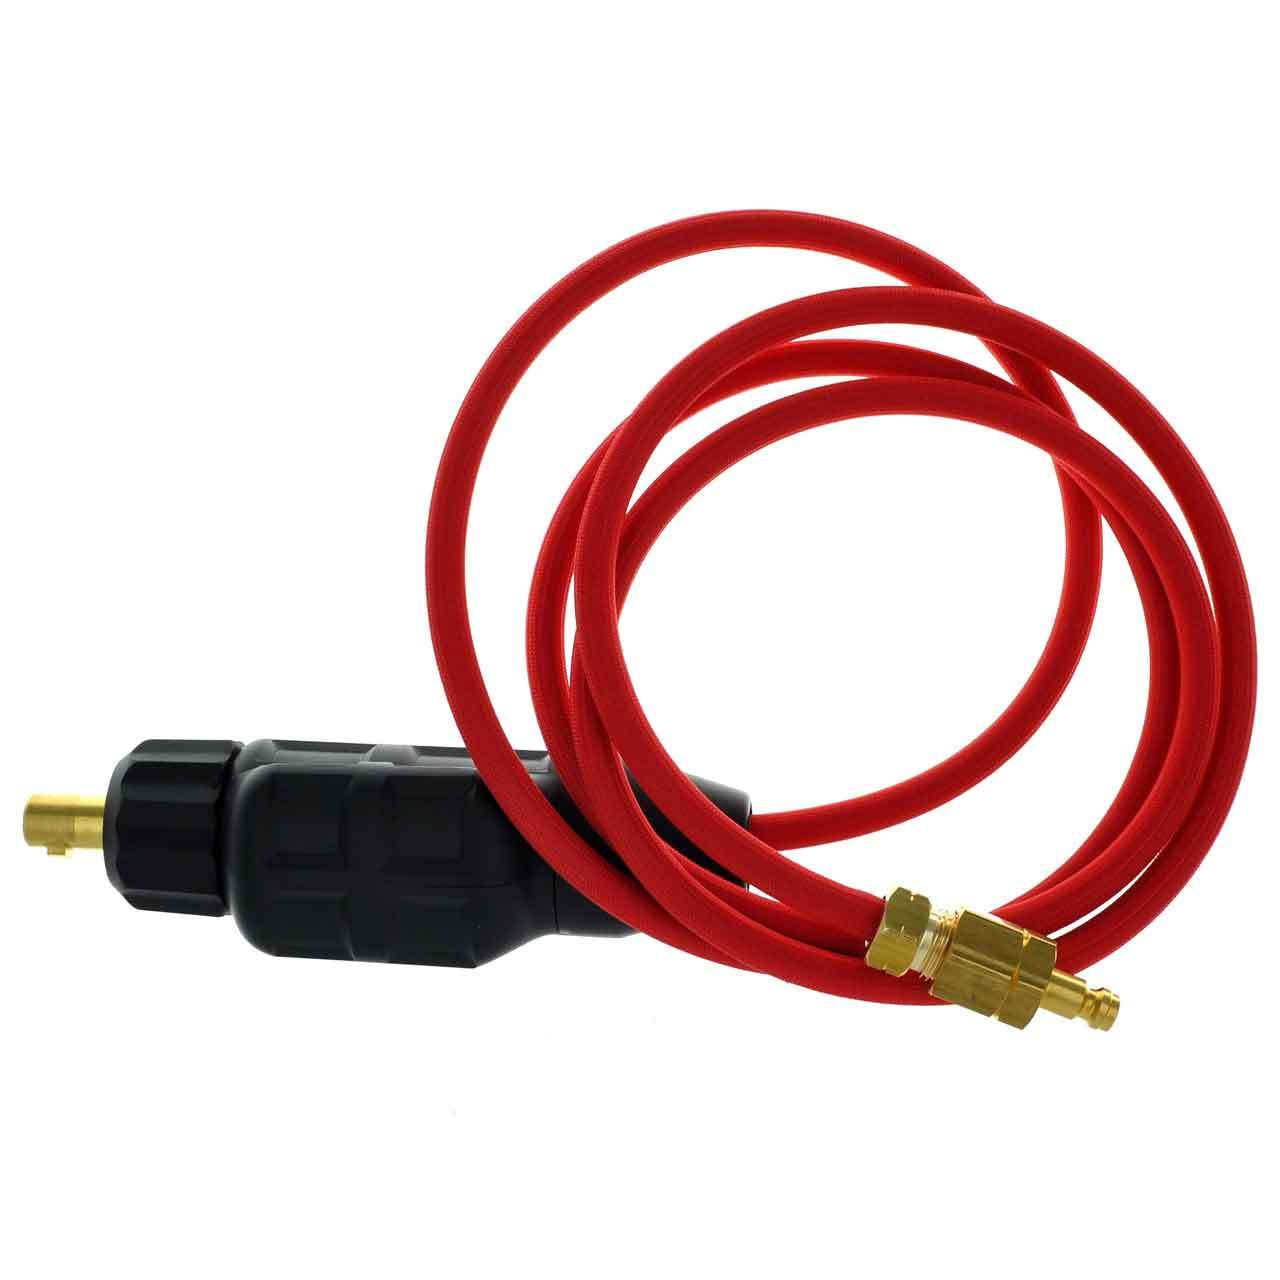 Shop CK Worldwide Water Cooled Dinse Cable Connectors | Canada